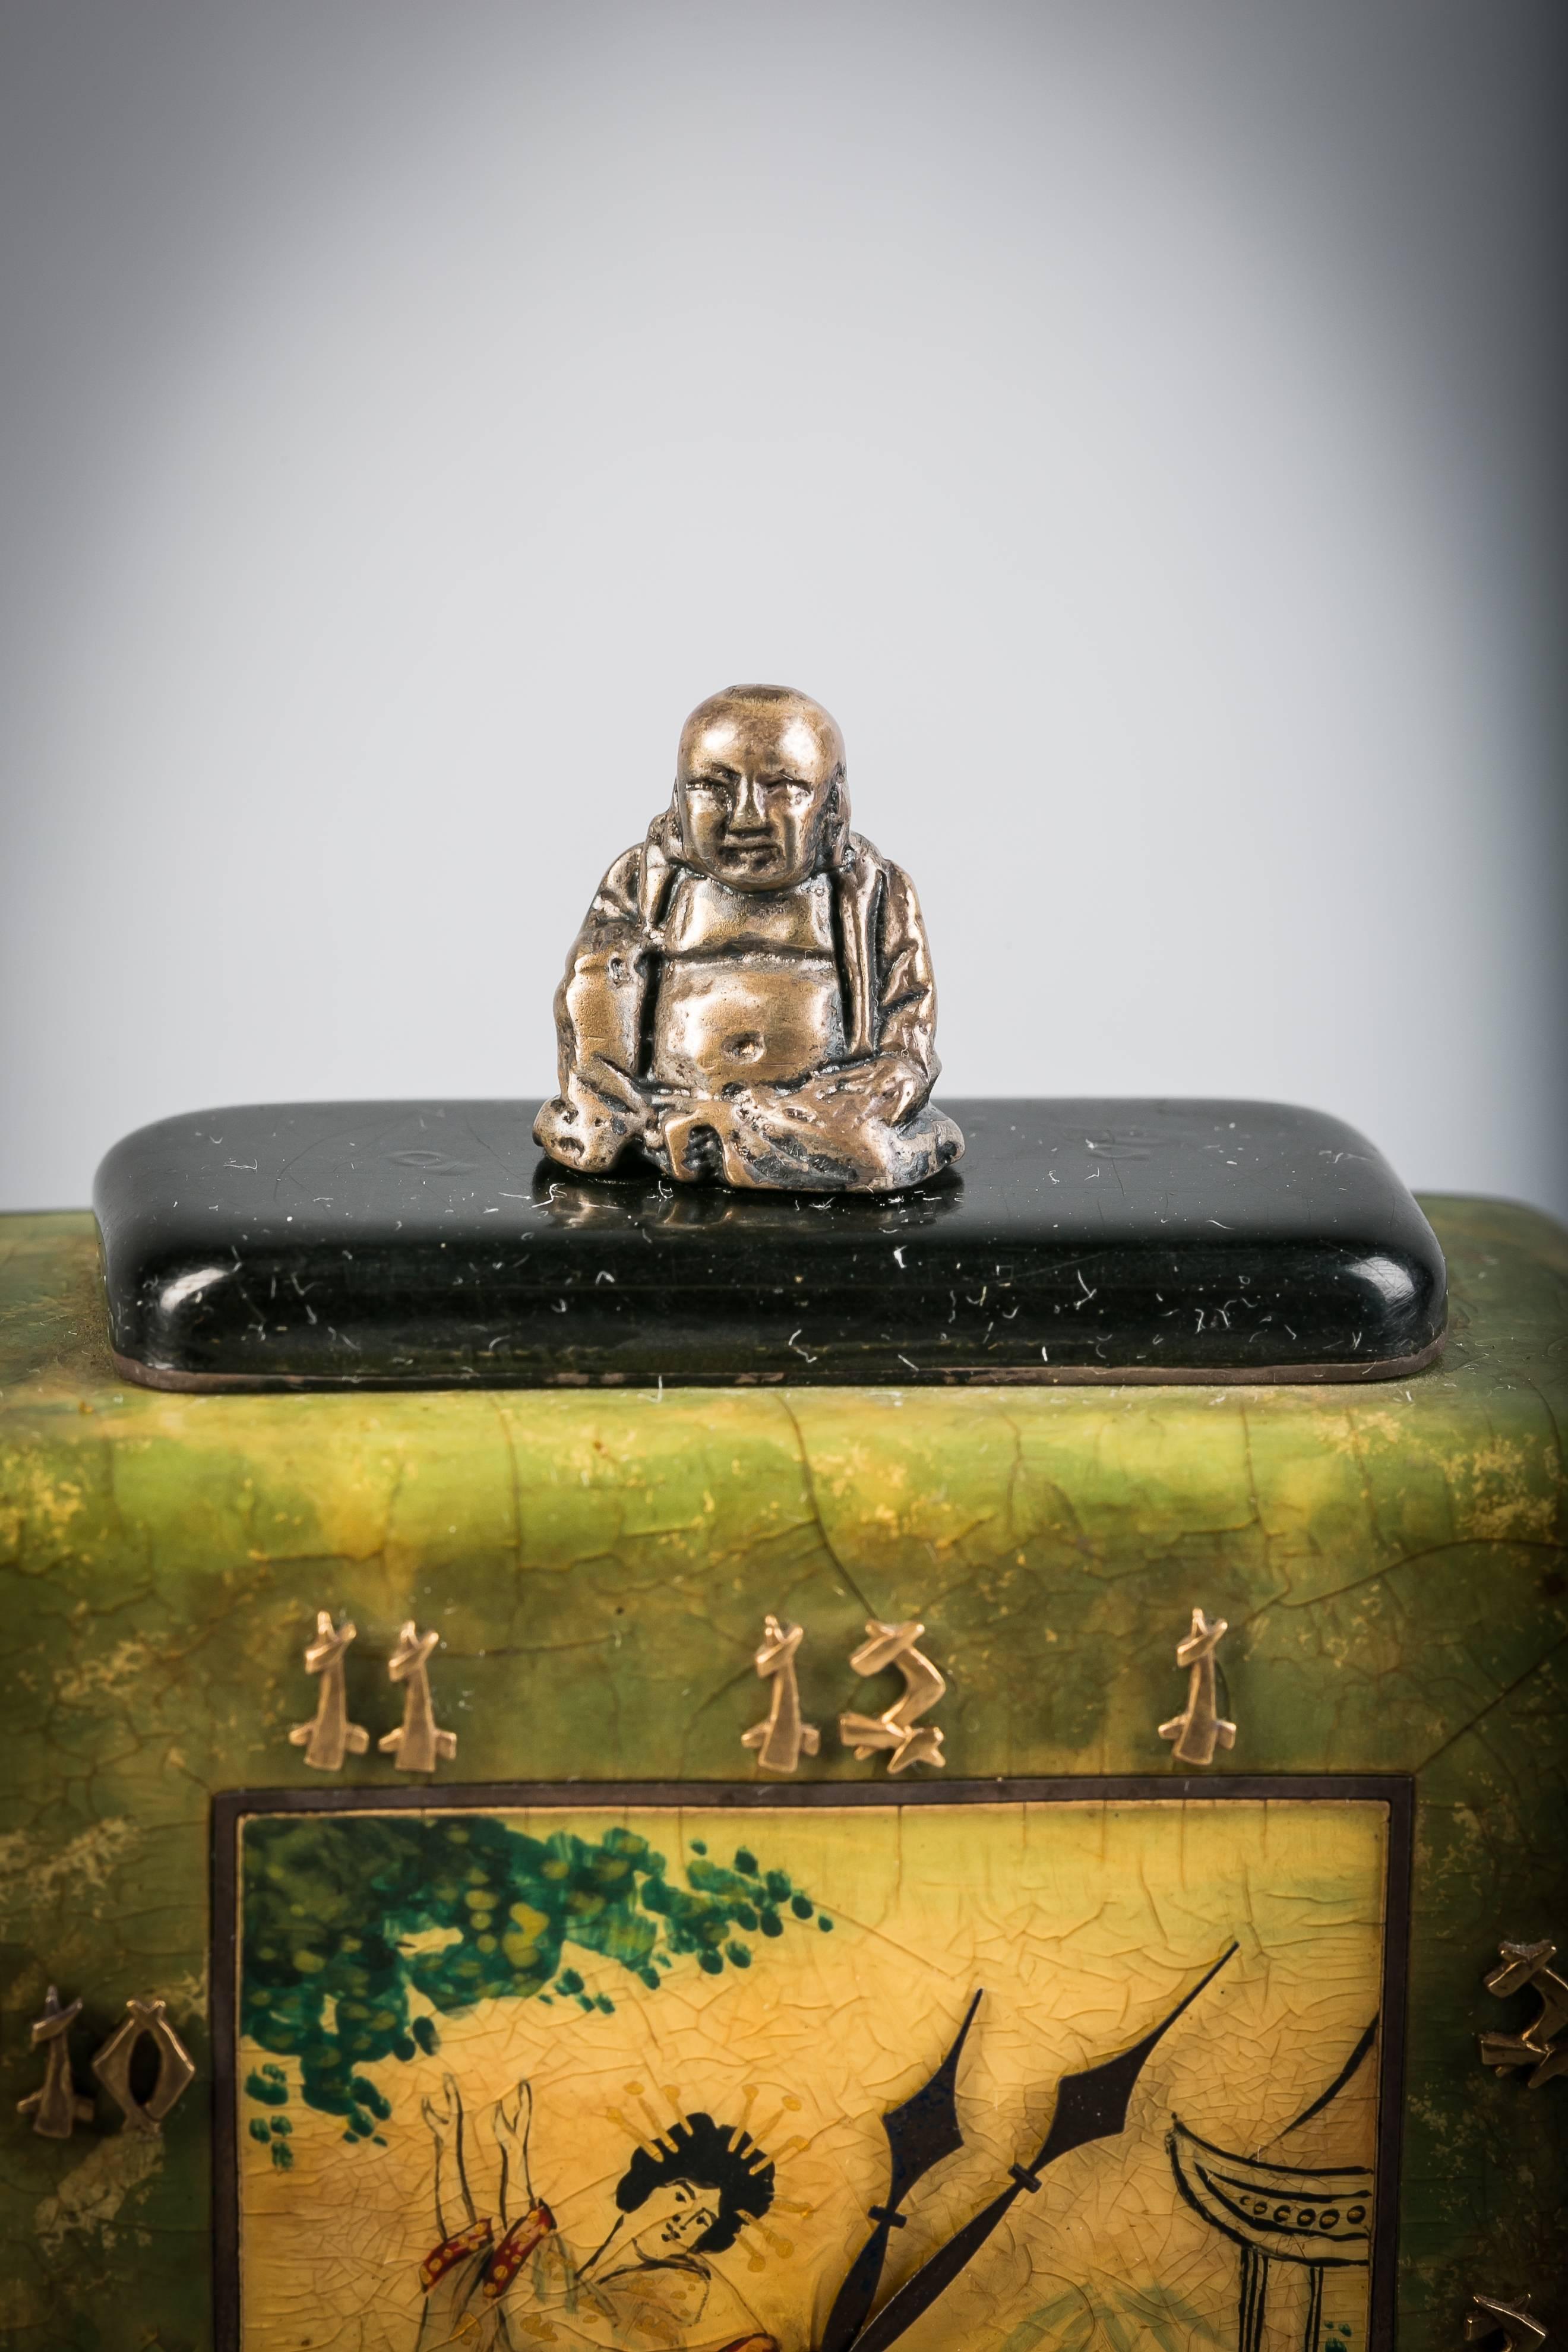 With smoky Agate Buddha all mounted on a silvered bronze and enamel rose quartz base.